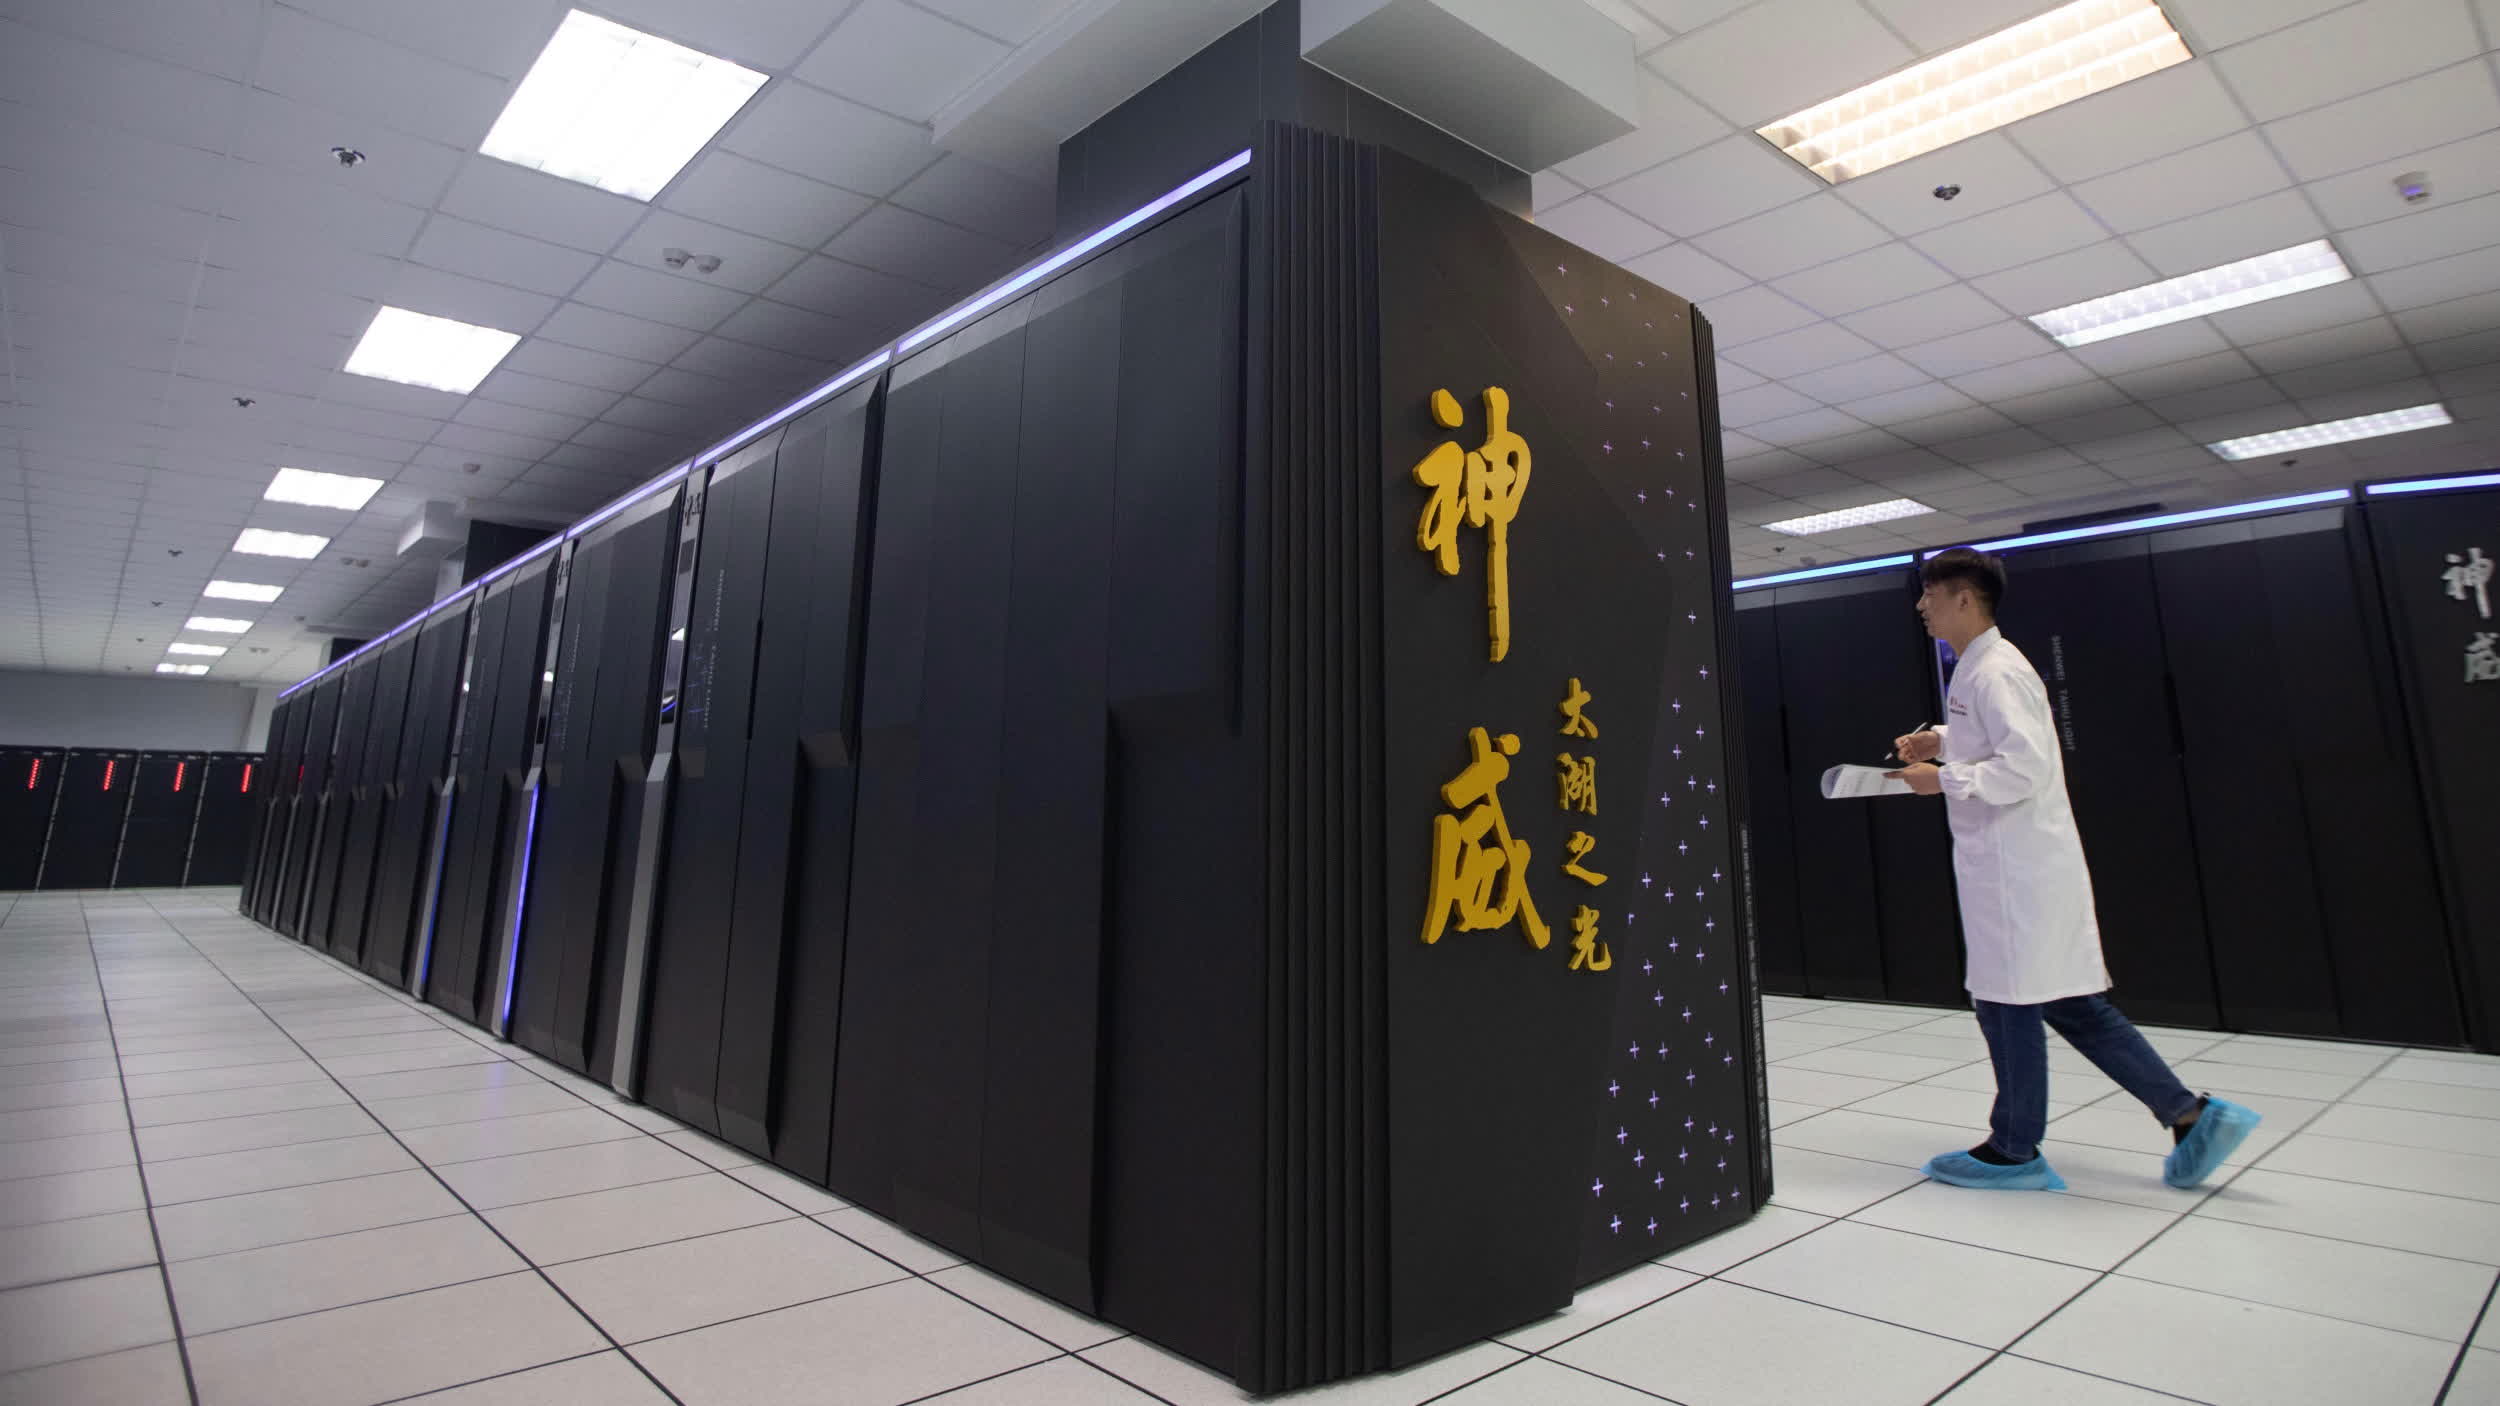 Sunway SW26010-Pro is China's most powerful supercomputer chip to date